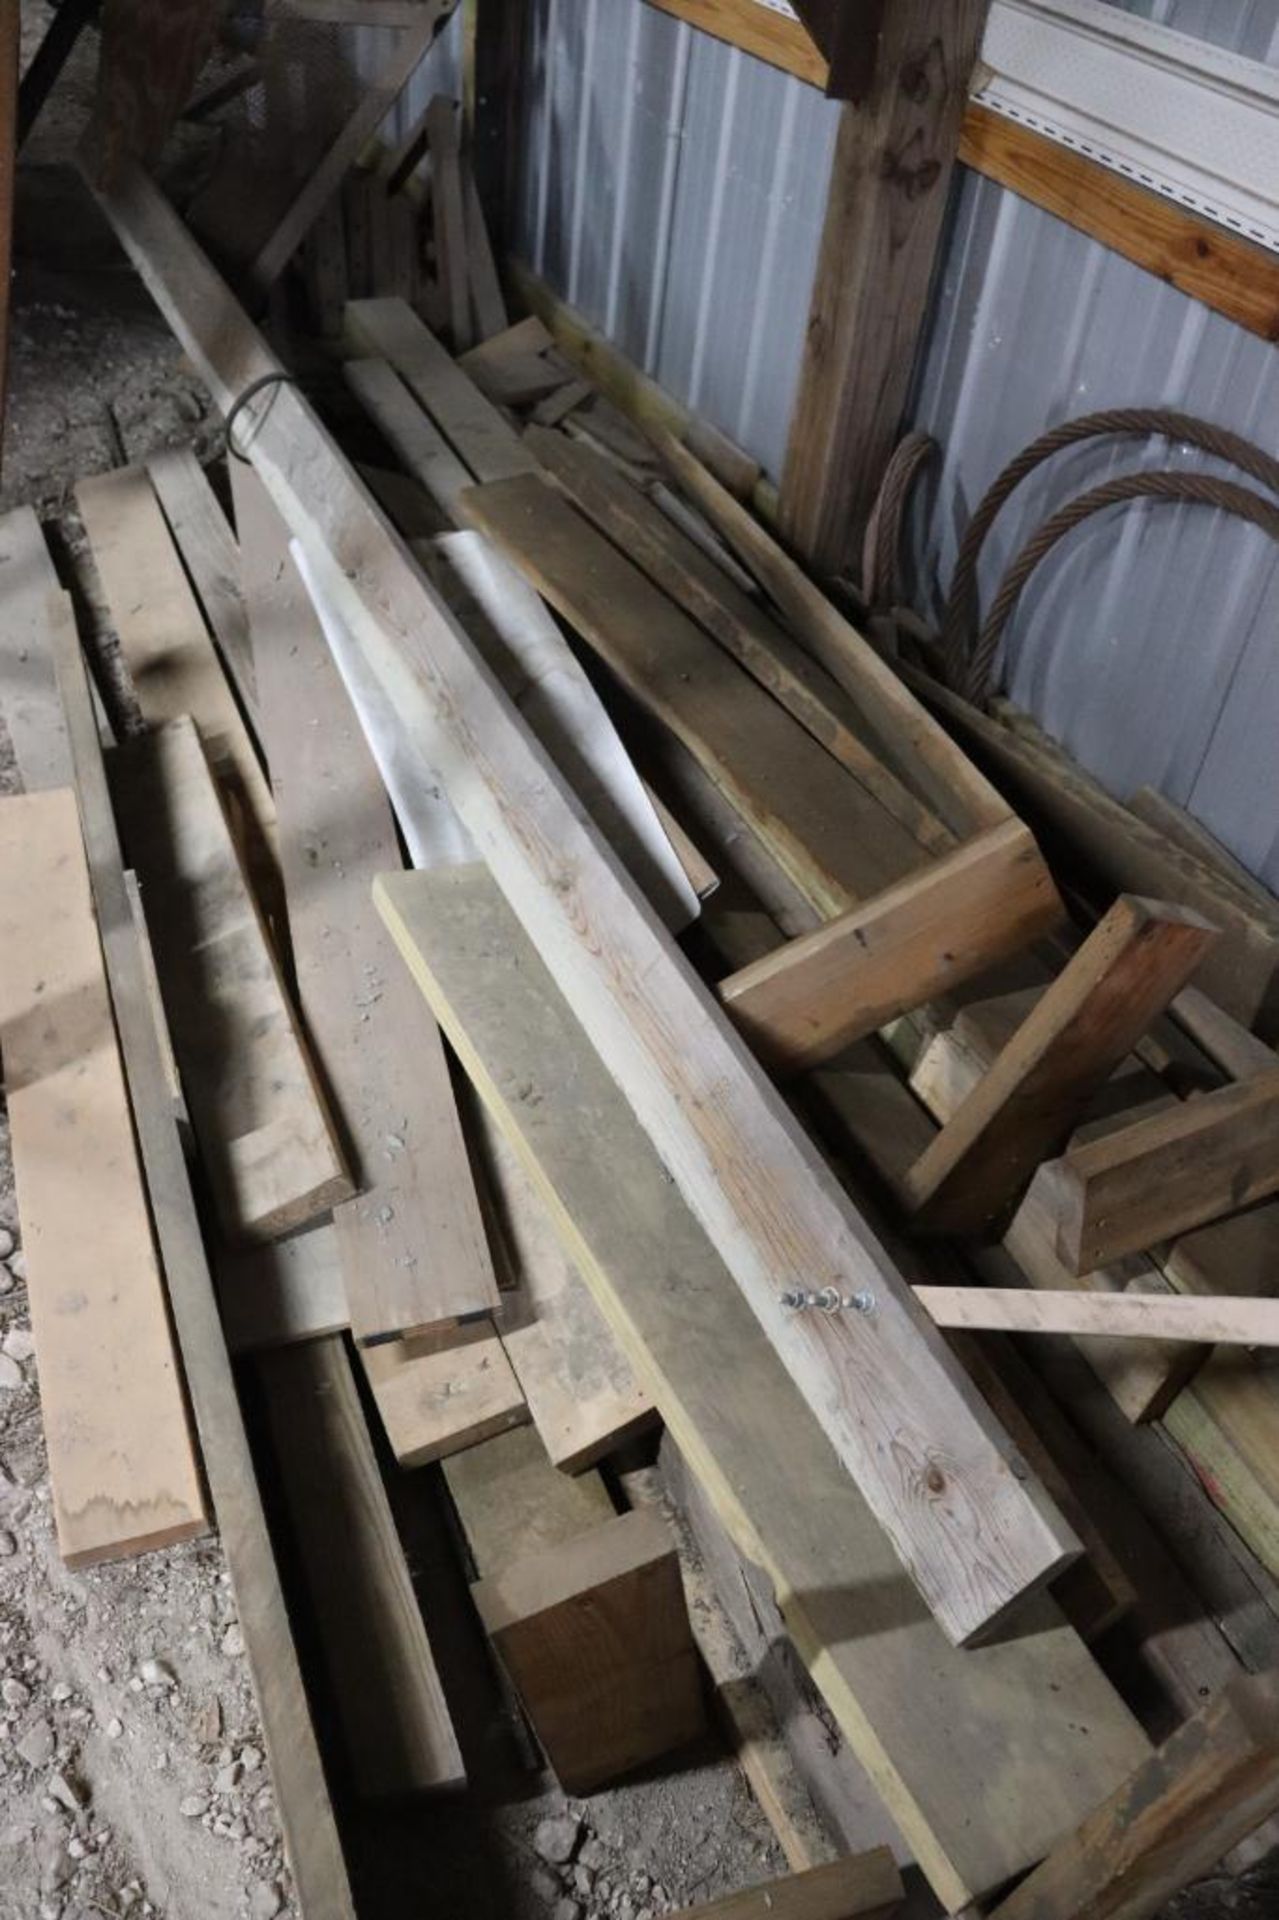 Lumber rack contents - Image 11 of 24